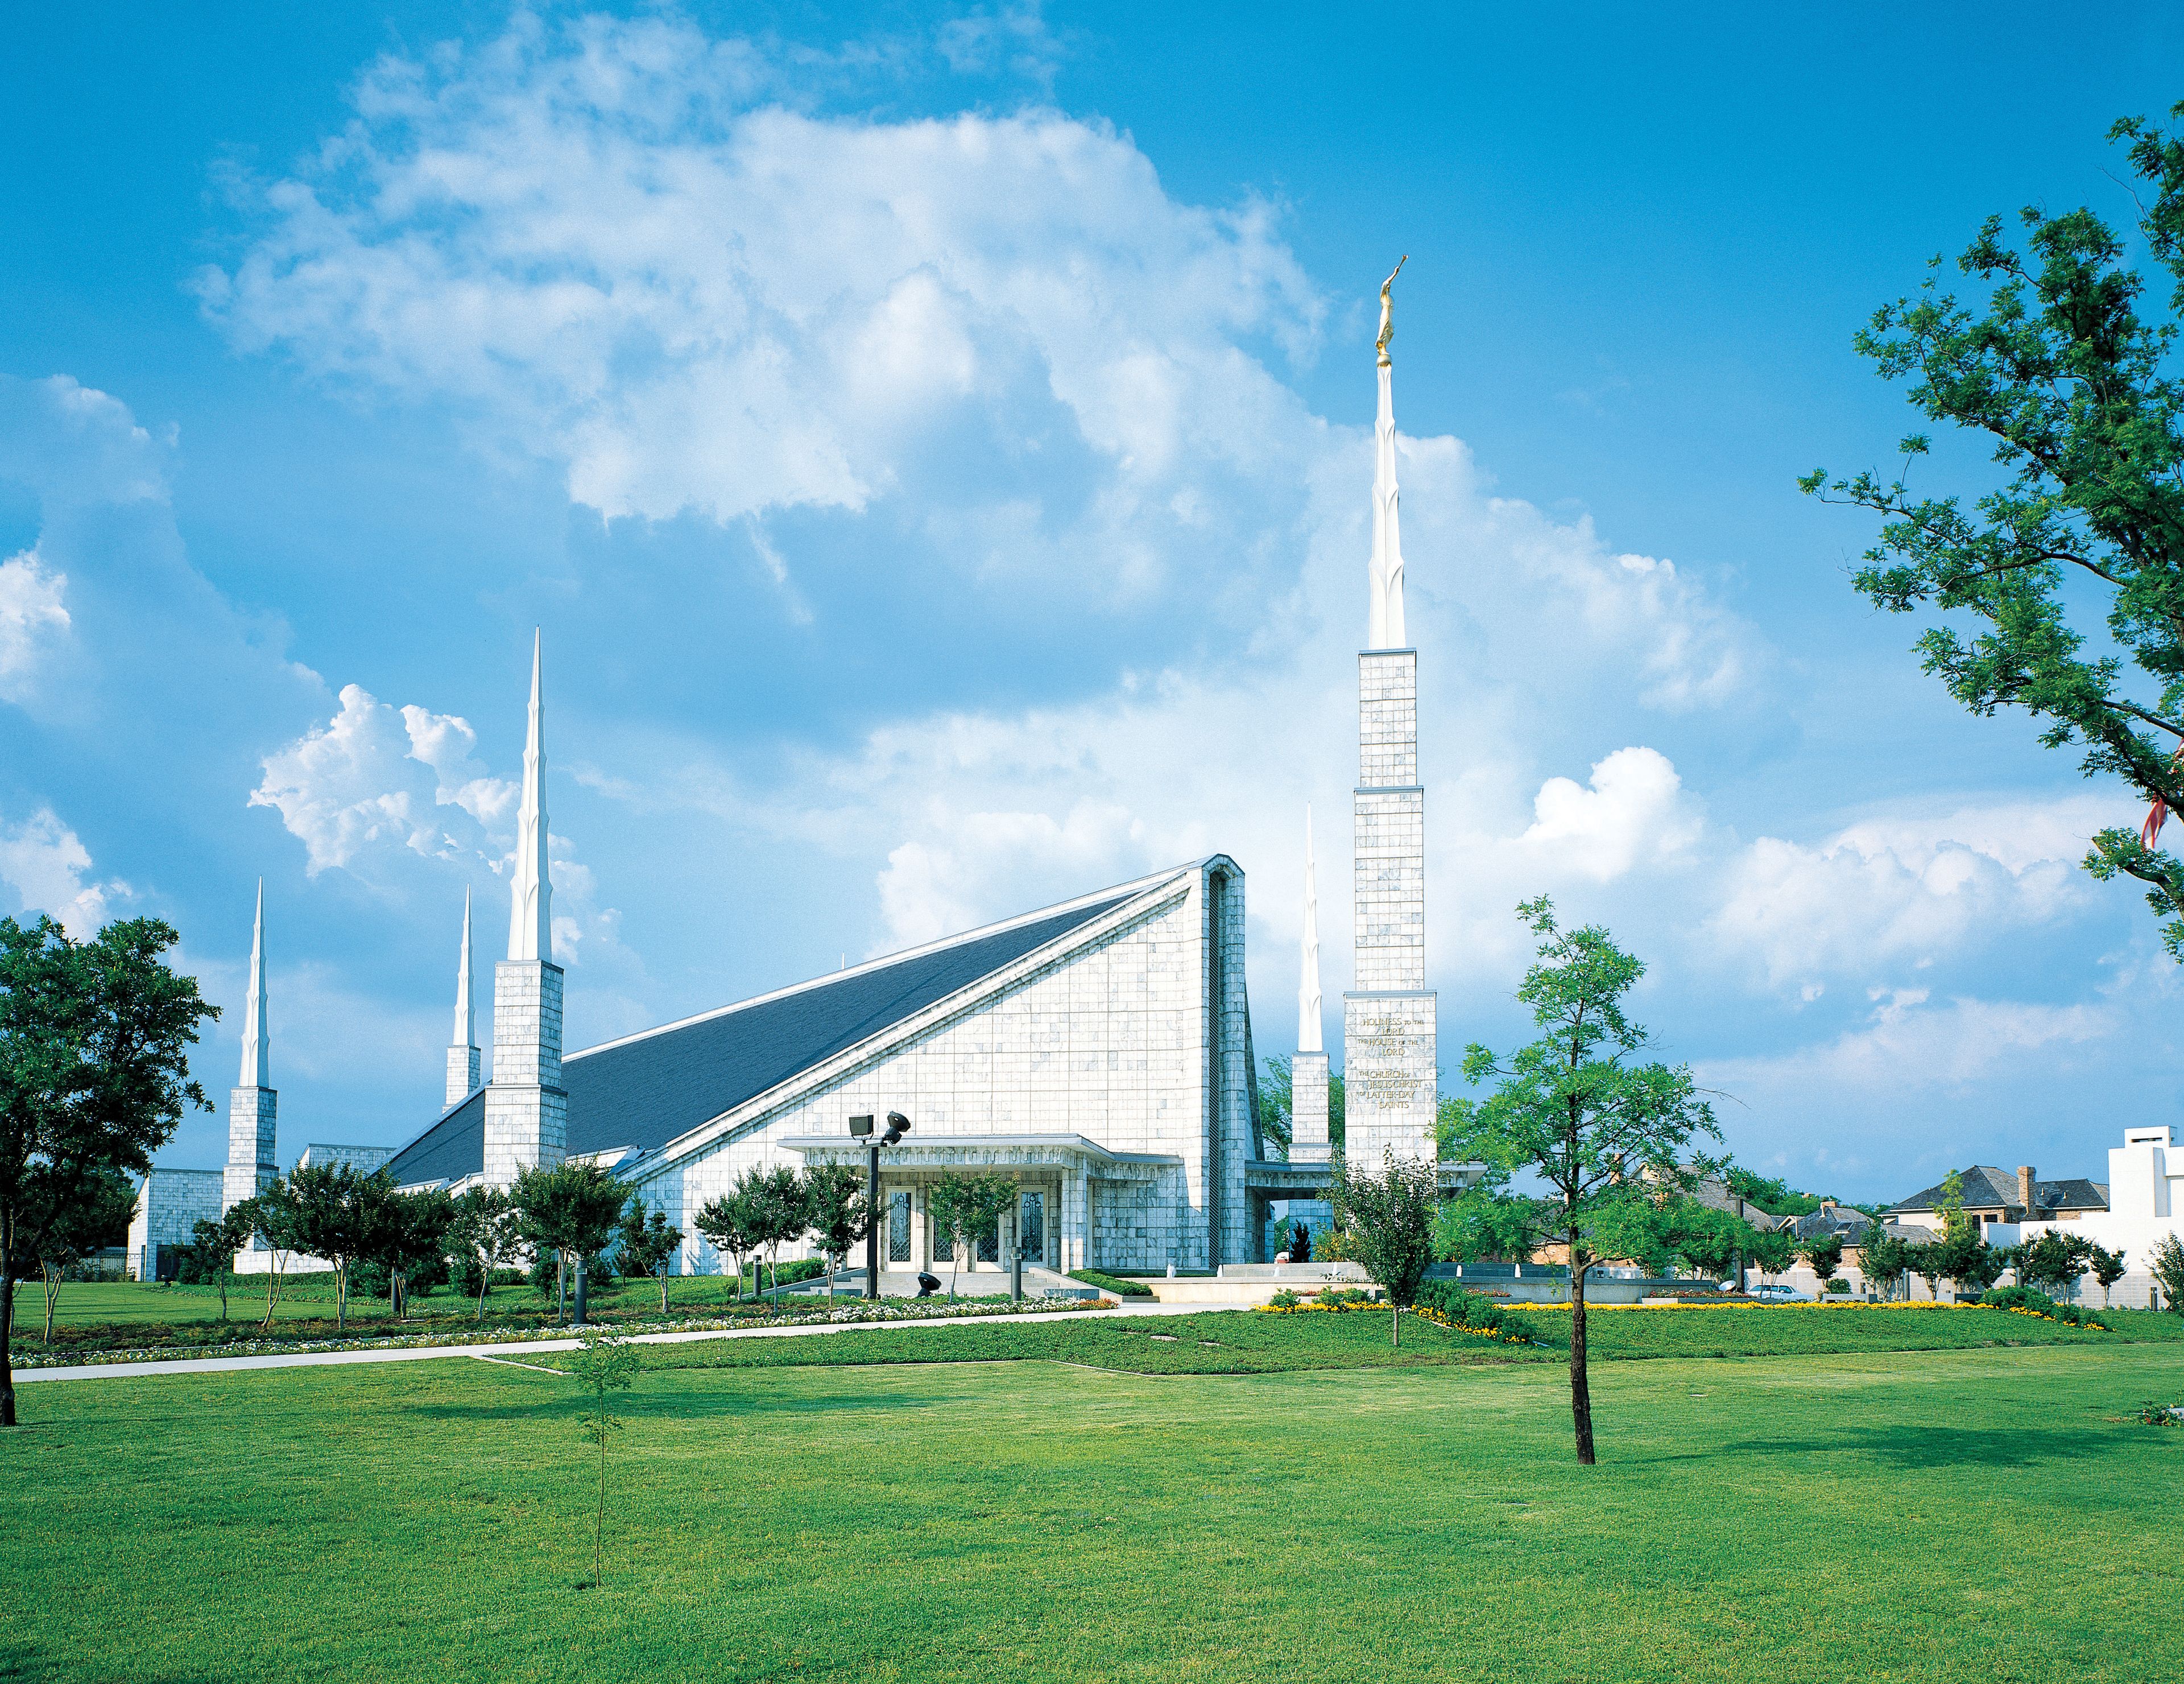 A front view of the Dallas Texas Temple and grounds.